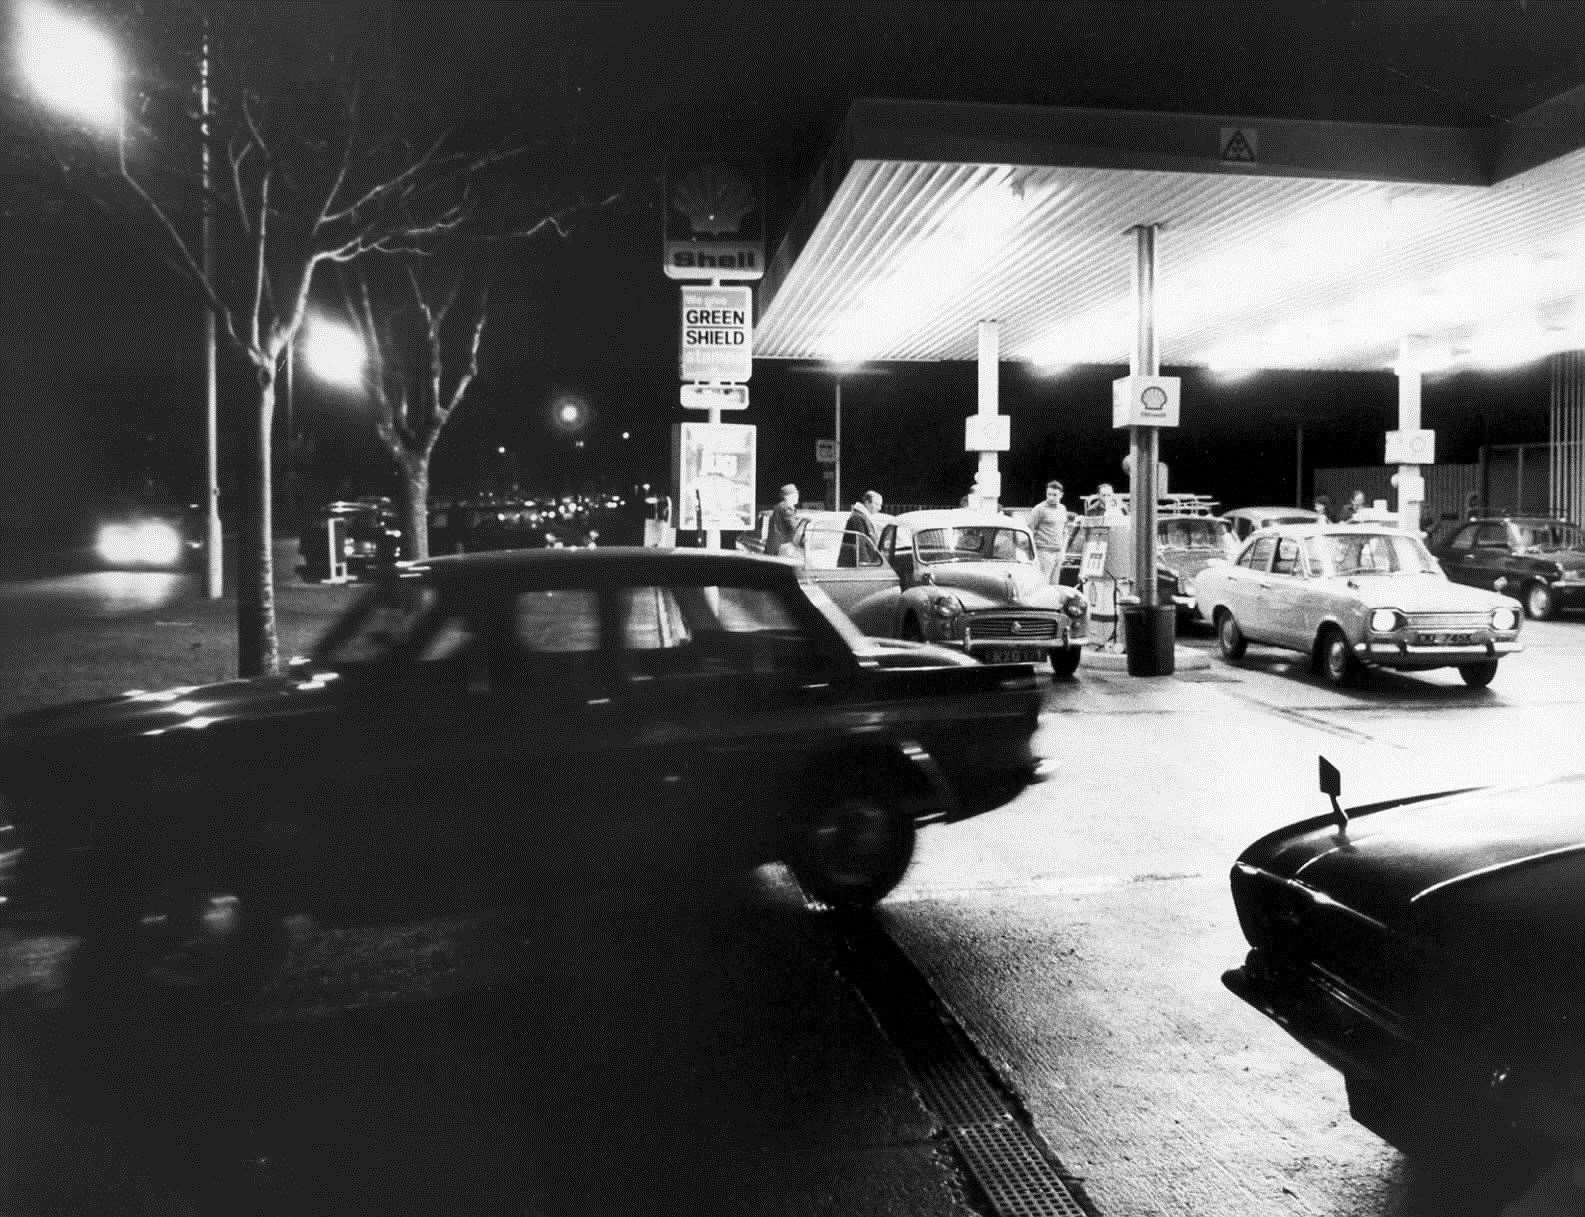 Queue for petrol in December 1973 ahead of the 'three-day week' being introduced